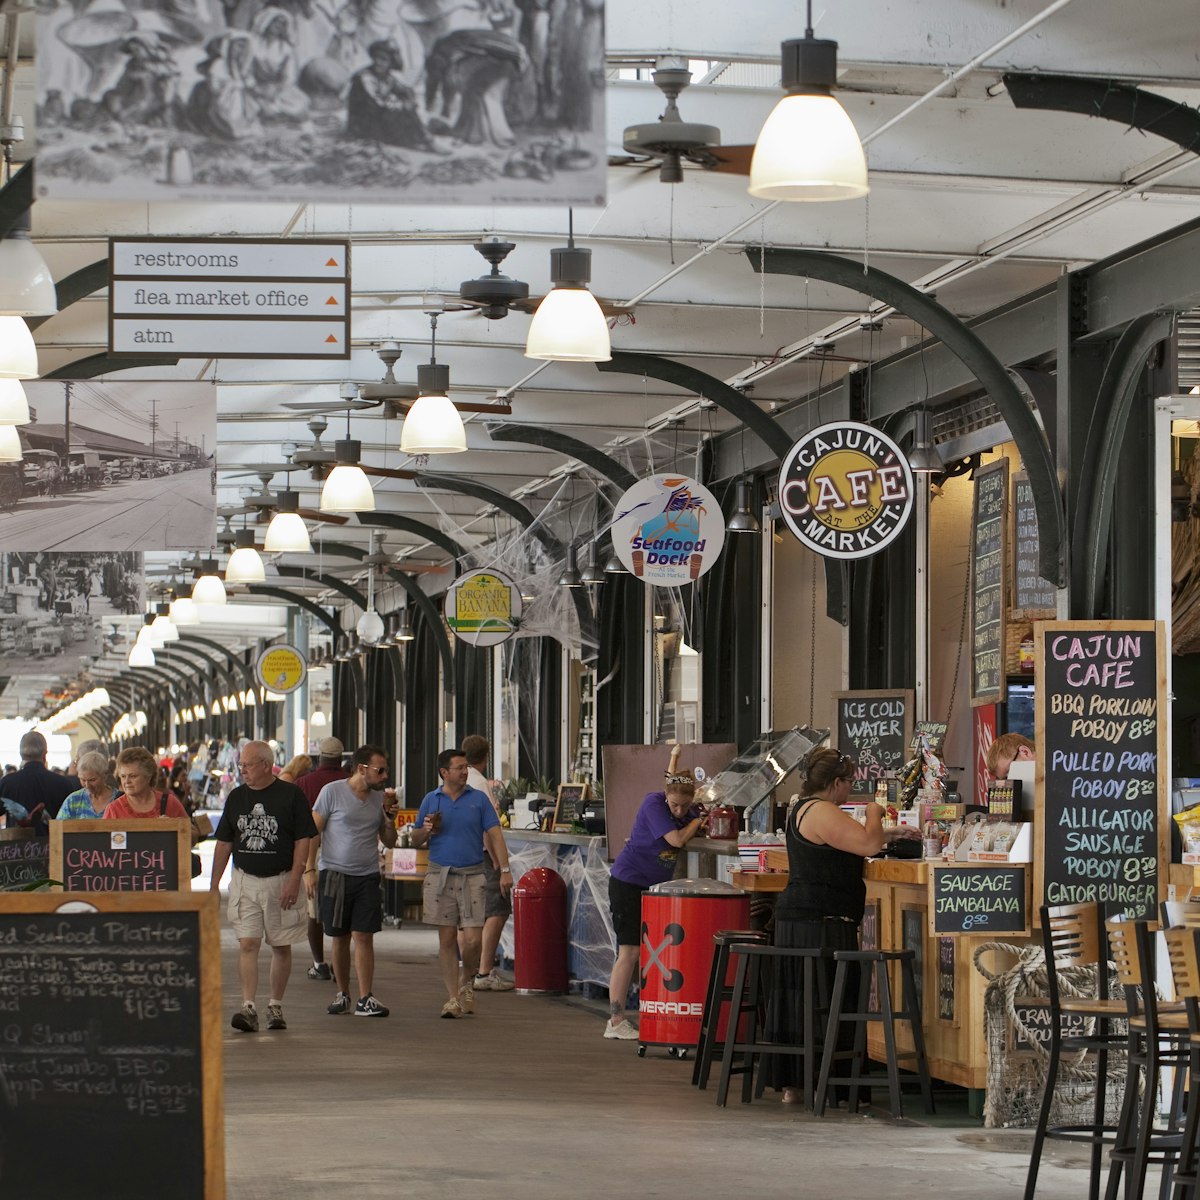 People dining in and strolling through the French Market.